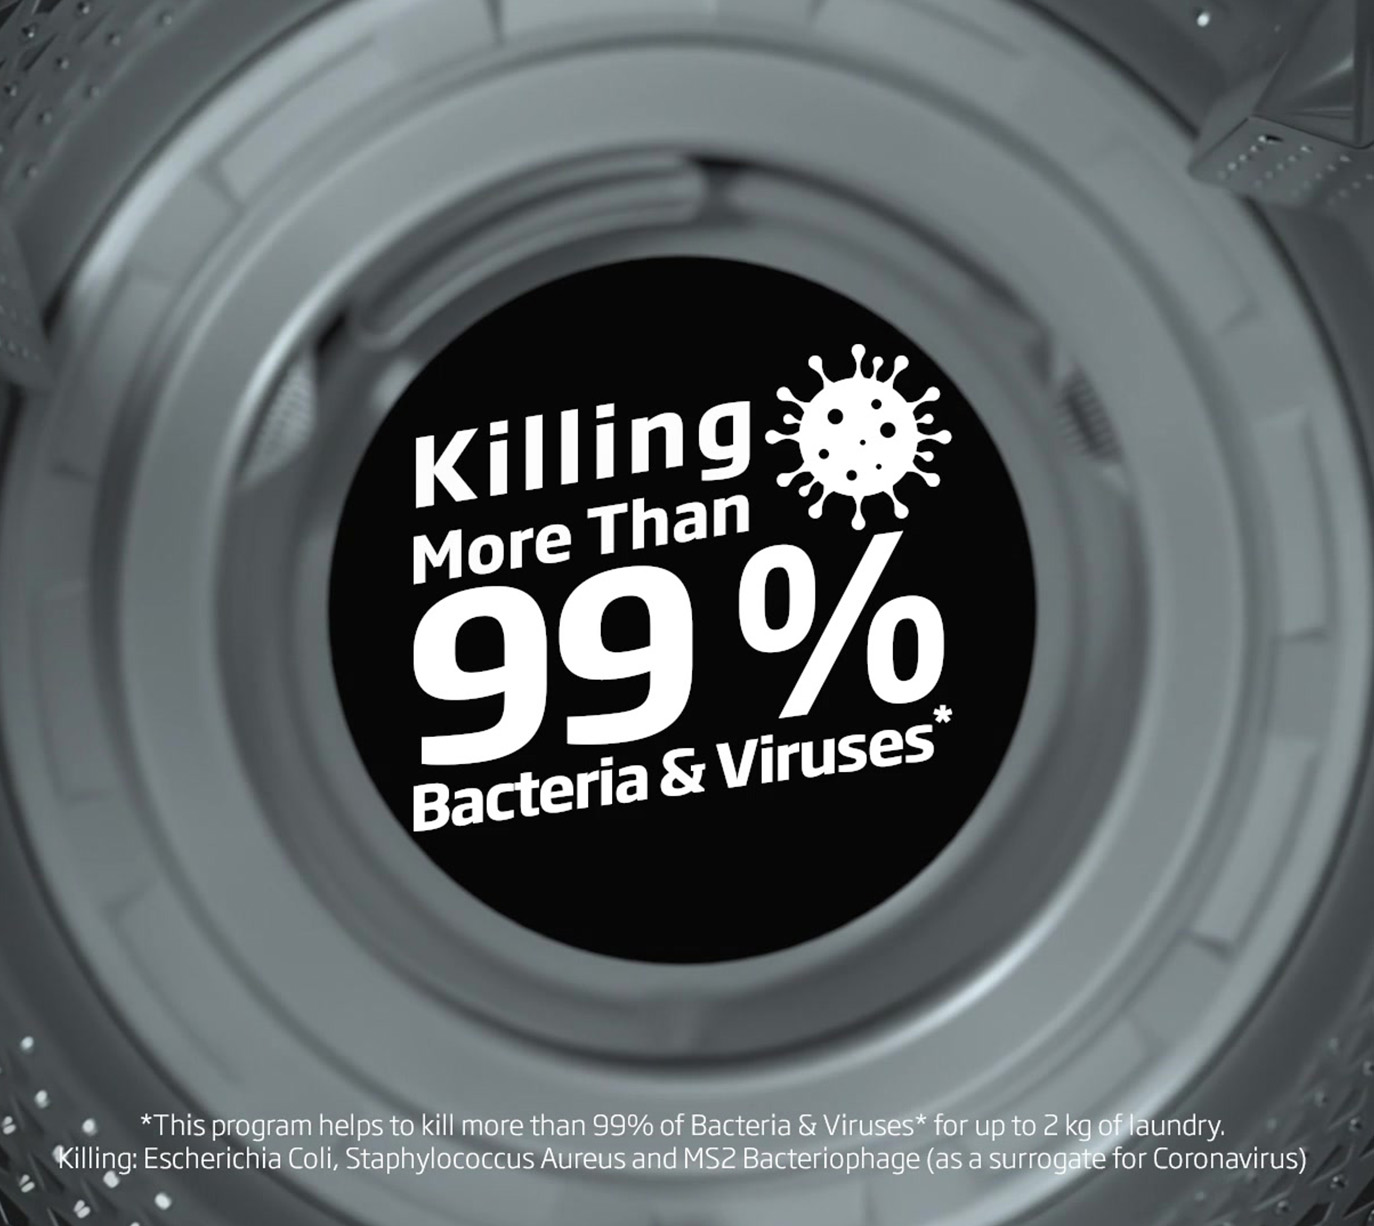 HygieneTherapy- Kills more than 99% of bacteria and viruses